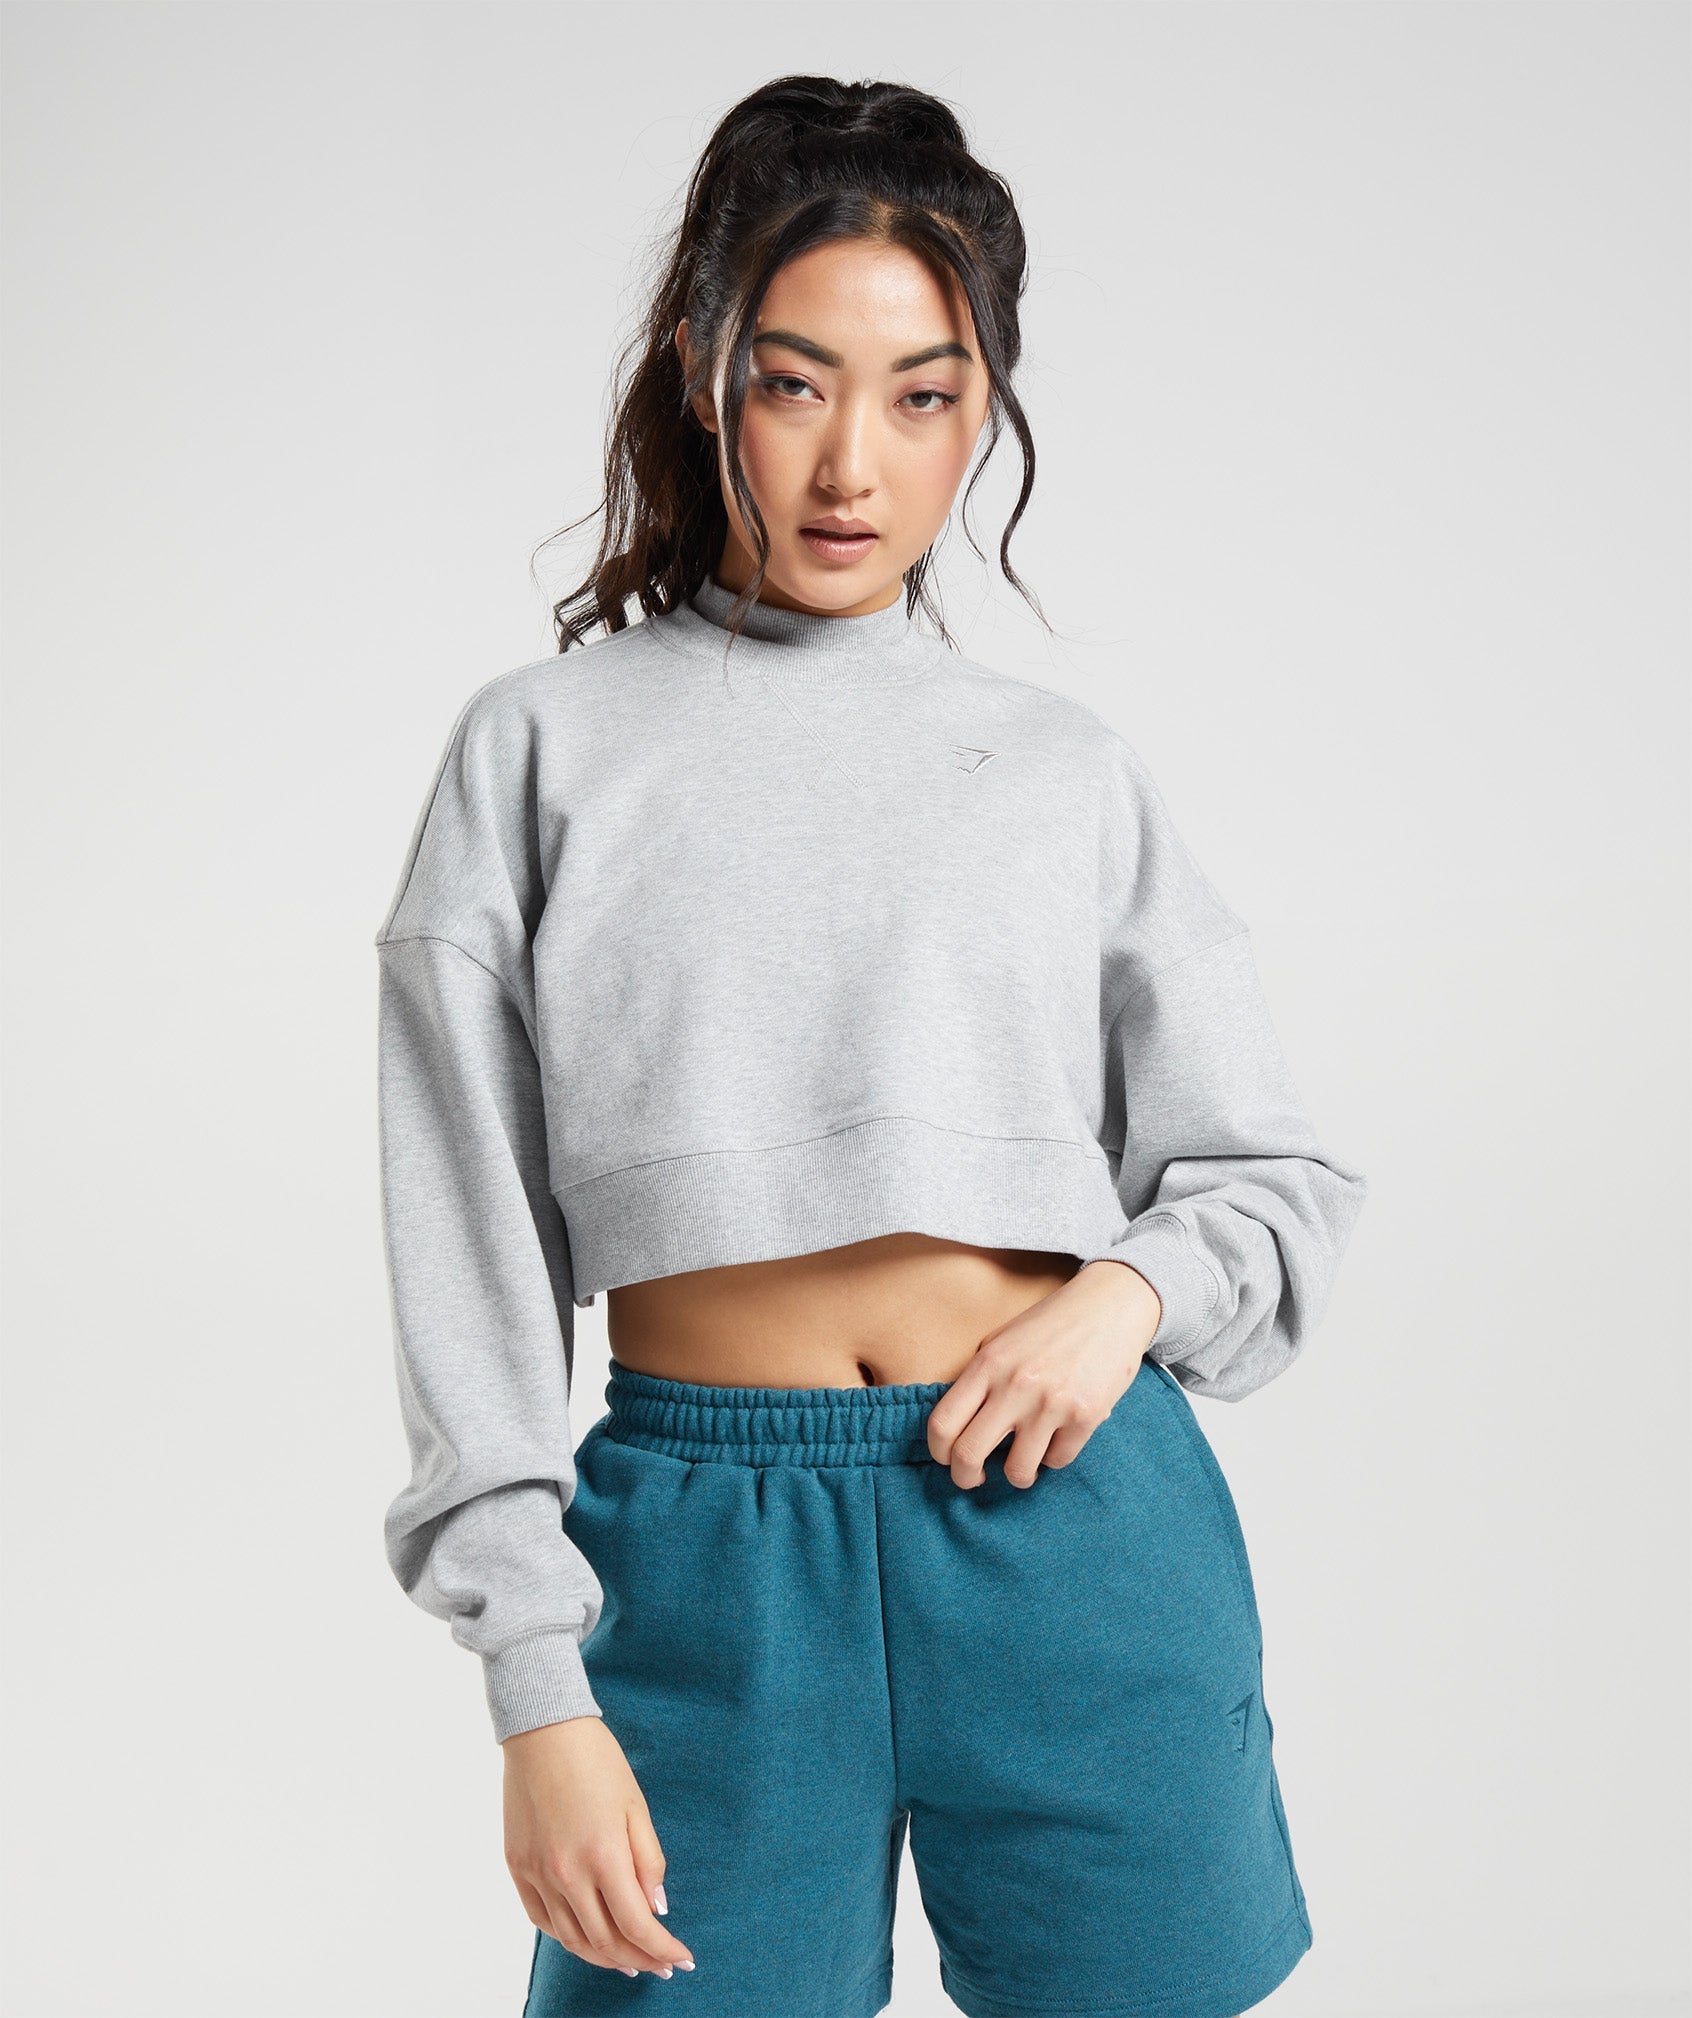 Rest Day Sweats Cropped Pullover in {{variantColor} is out of stock